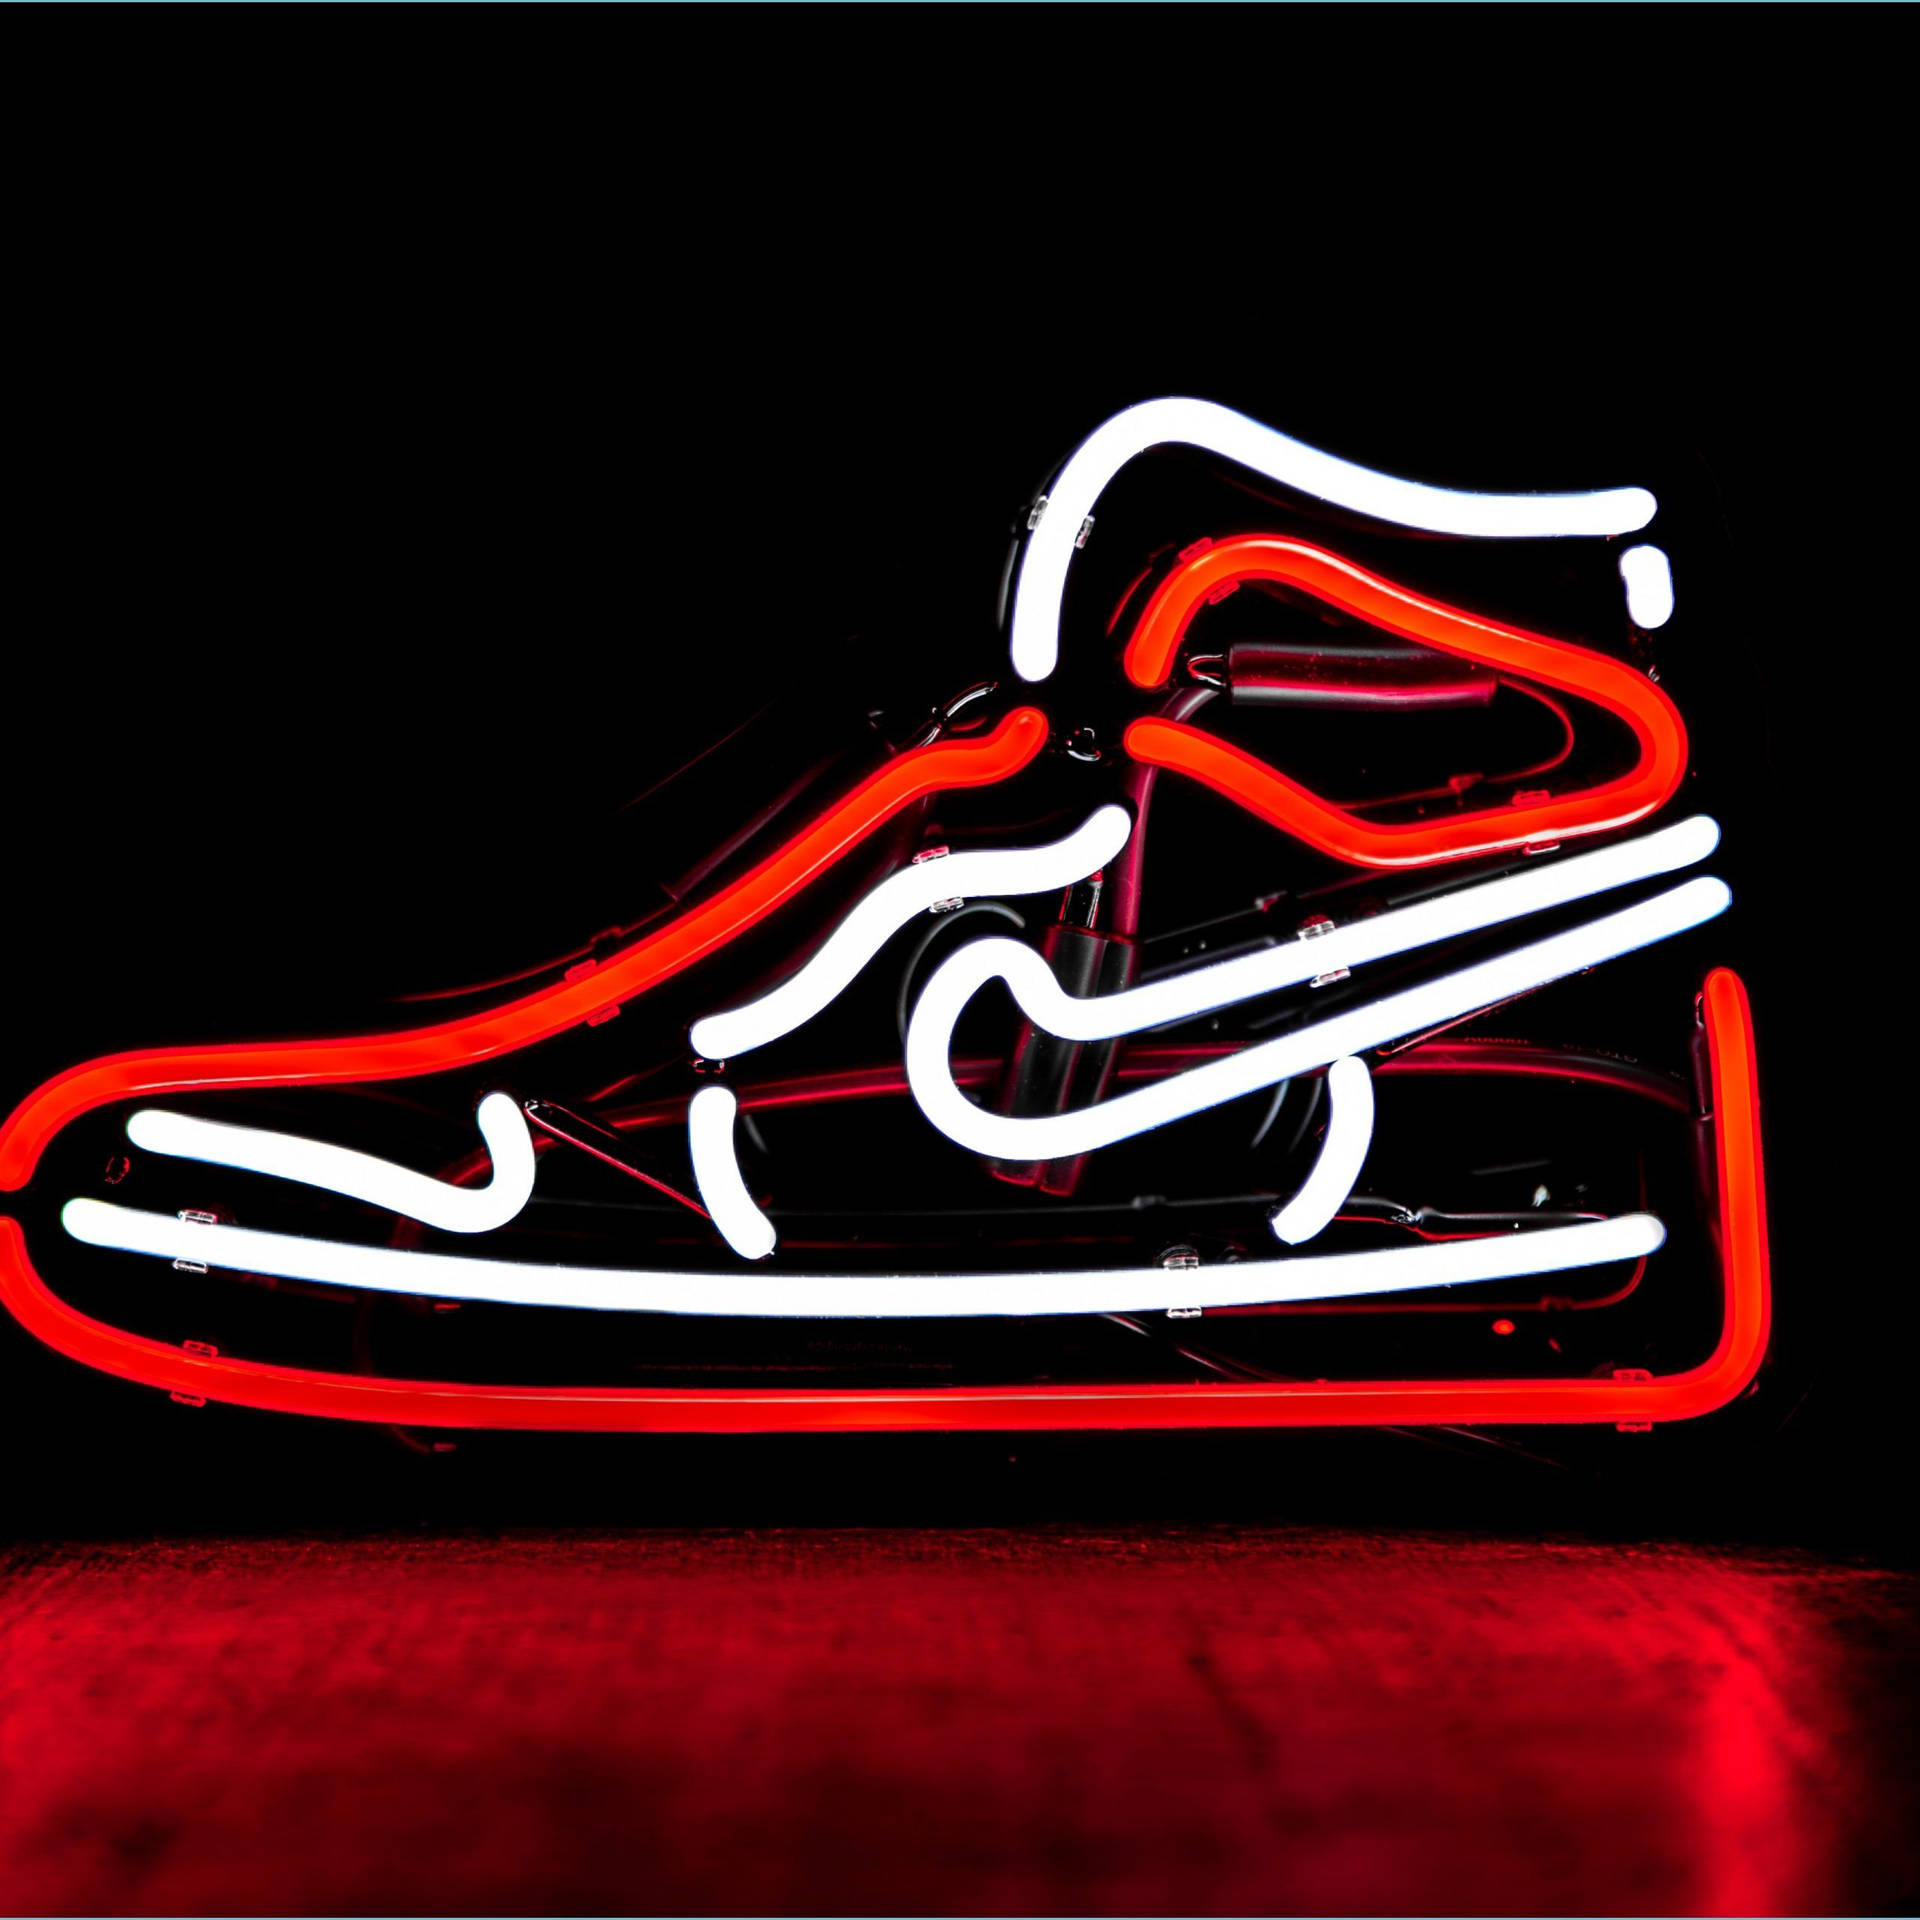 Feel the power with the cool Nike shoe Wallpaper